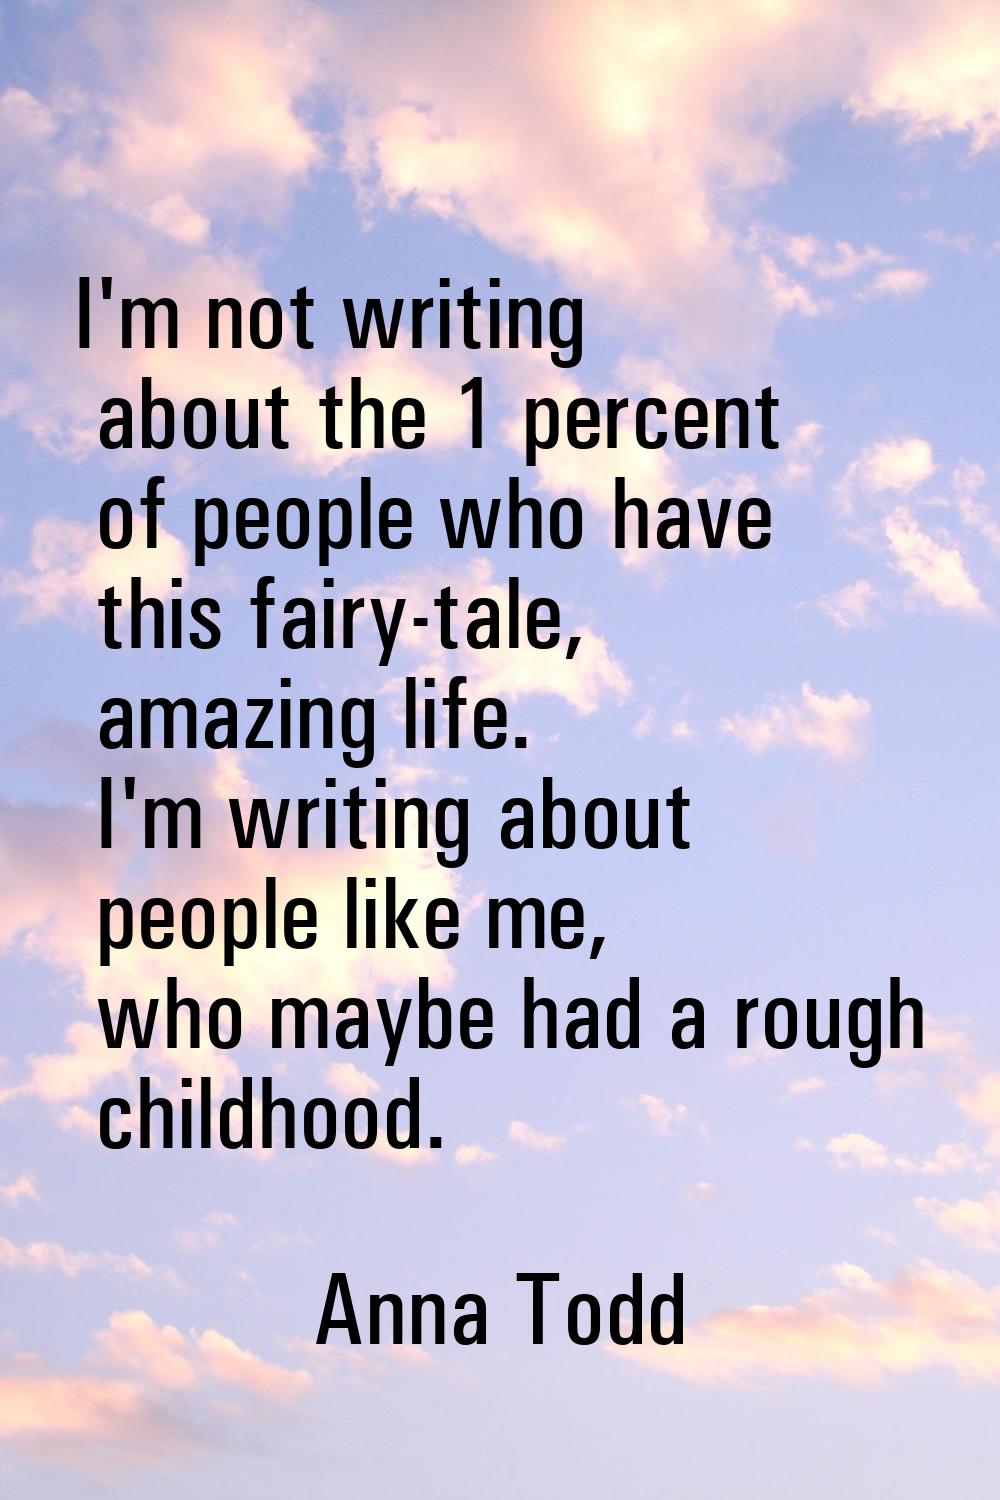 I'm not writing about the 1 percent of people who have this fairy-tale, amazing life. I'm writing a